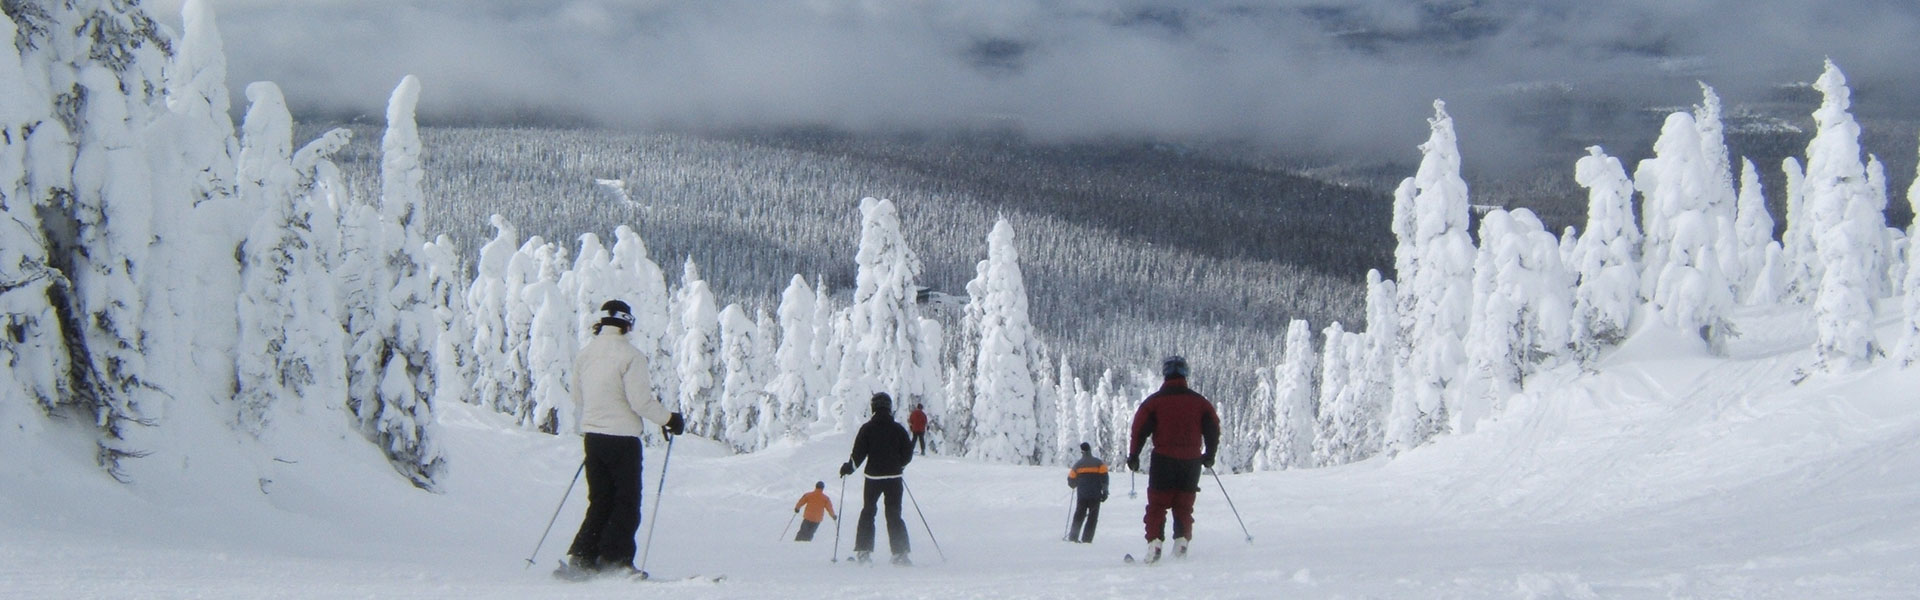 Okanagan Limousine offers private transportation to any ski area in British Columbia.